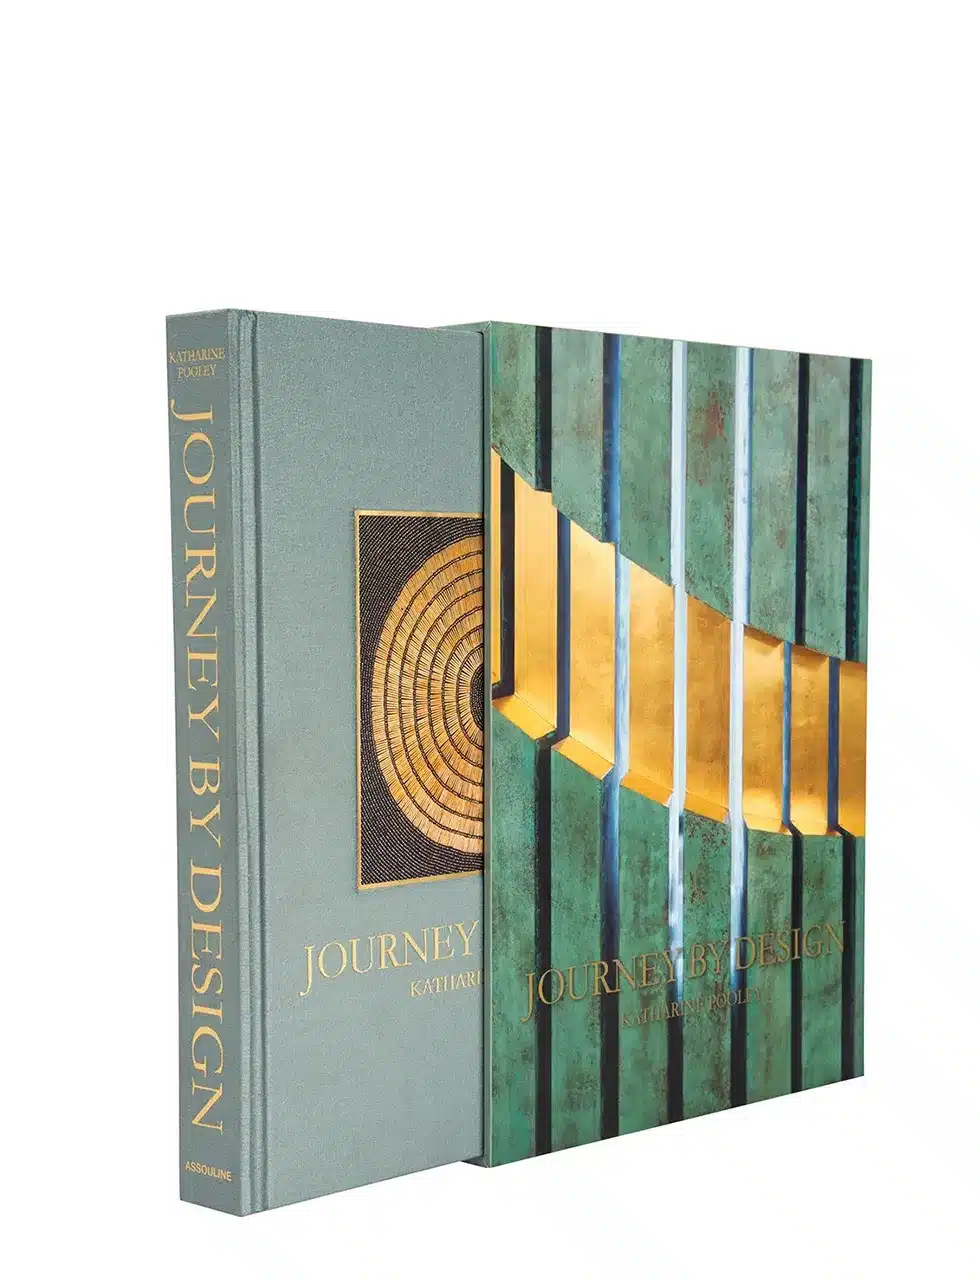 journey by design, katharine pooleys book, is a perfect reference for interior design inspiration